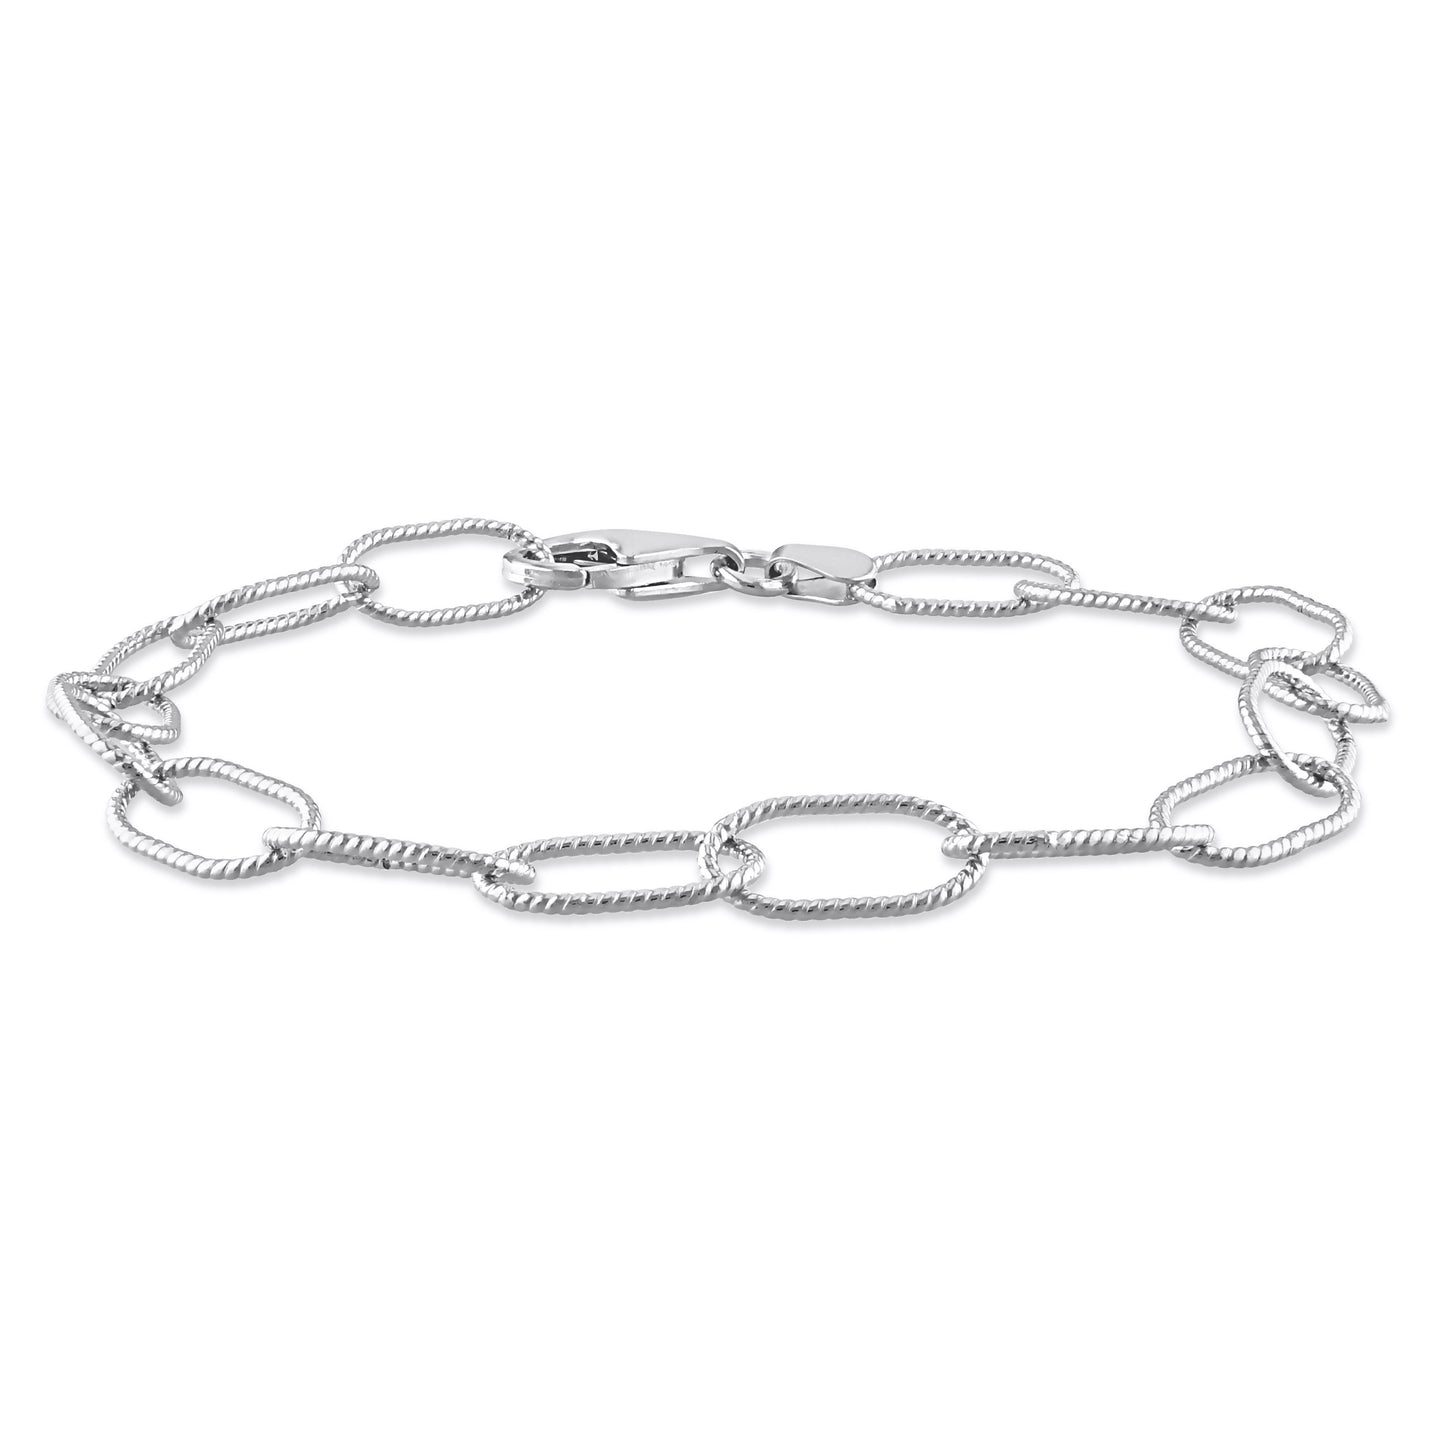 Sterling Silver Cable Rolo Chain Bracelet in 6.5mm